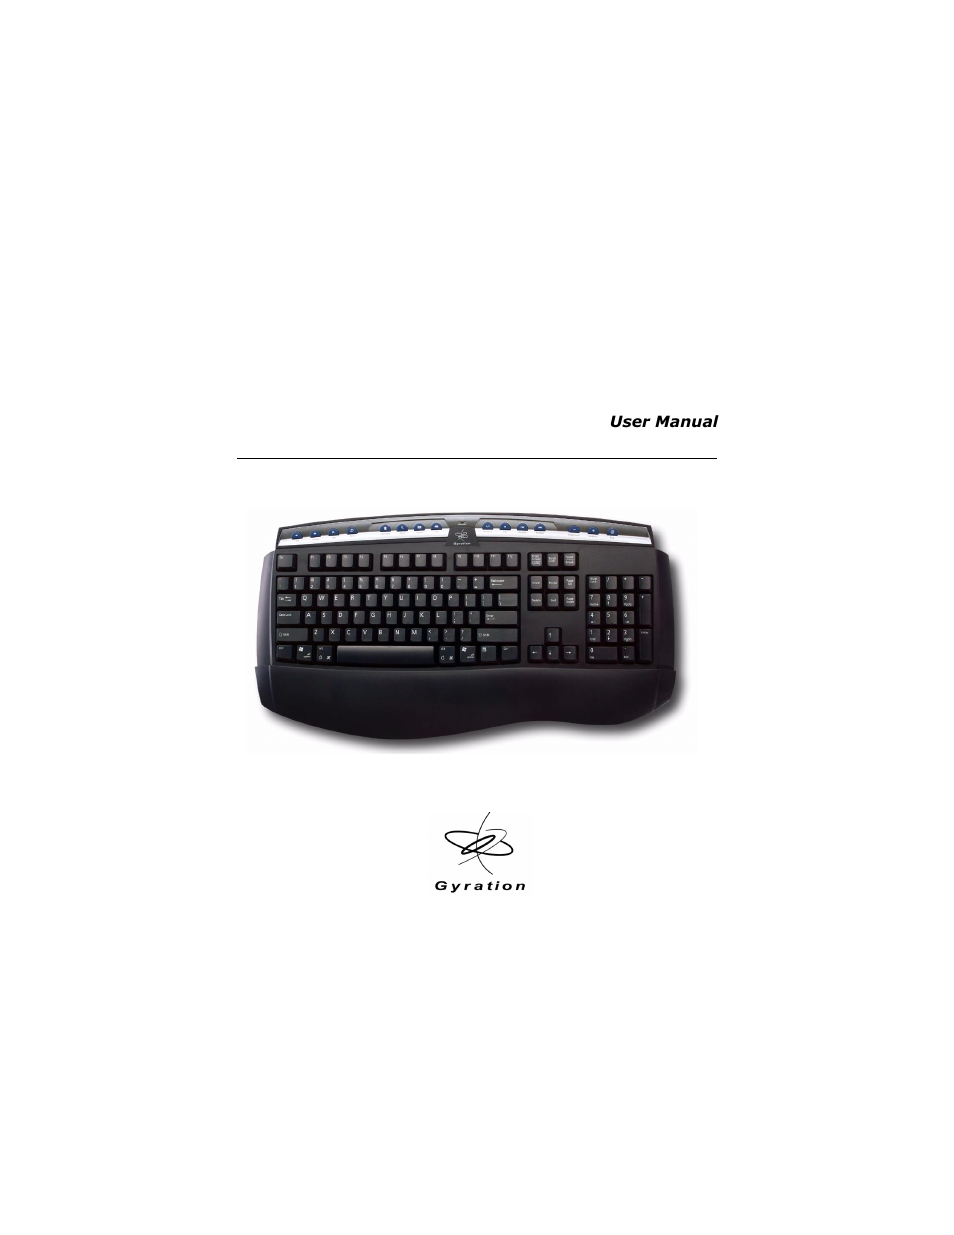 Gyration Full-Size Keyboard User Manual | 19 pages